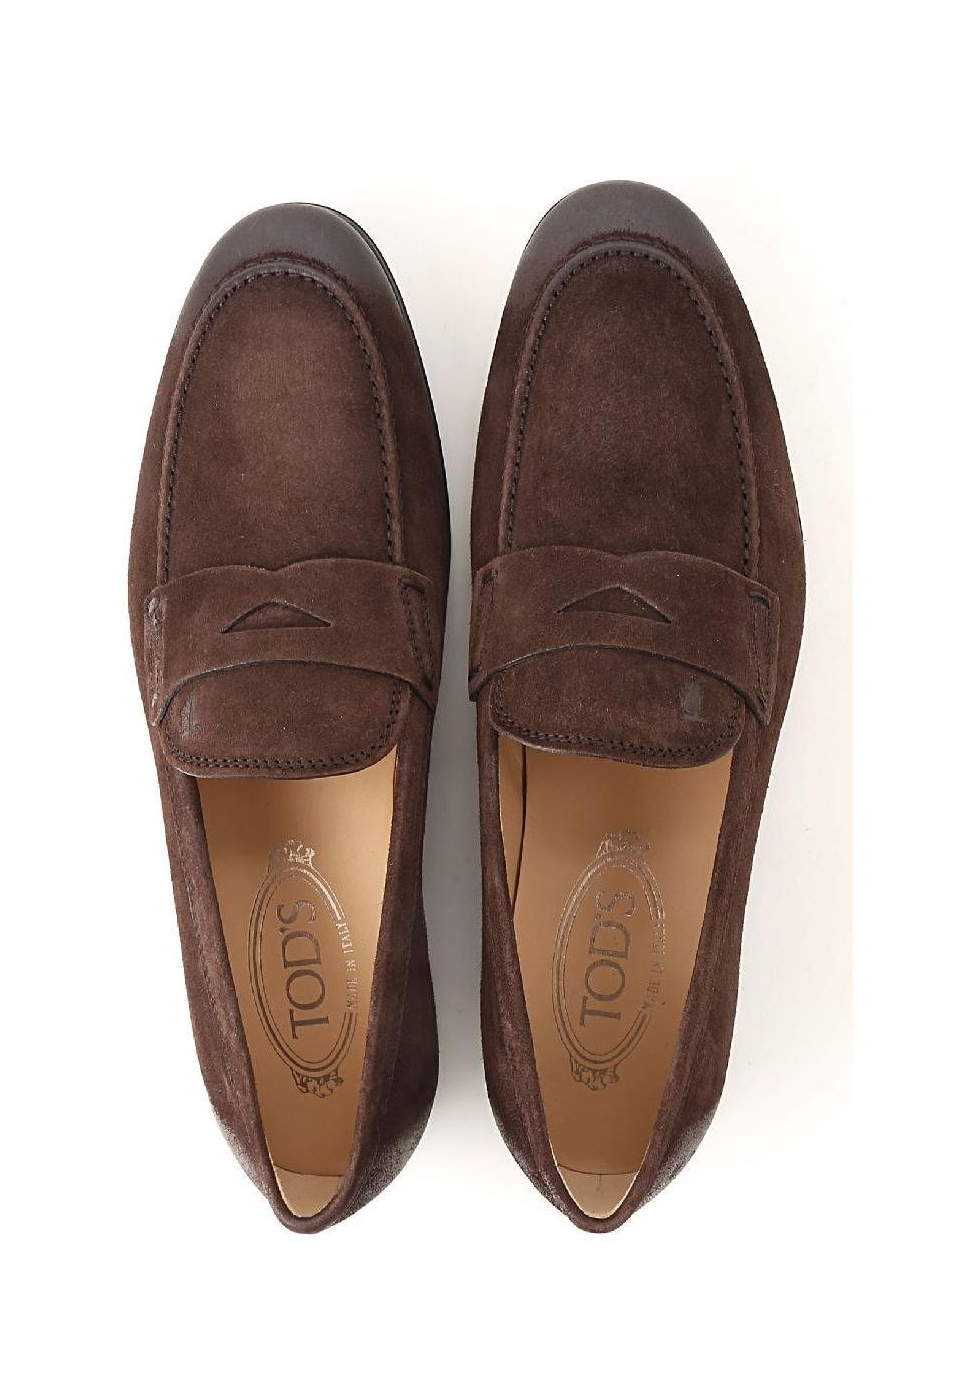 Tod's Men's moccasins in vintage Ebony Suede leather - Italian Boutique